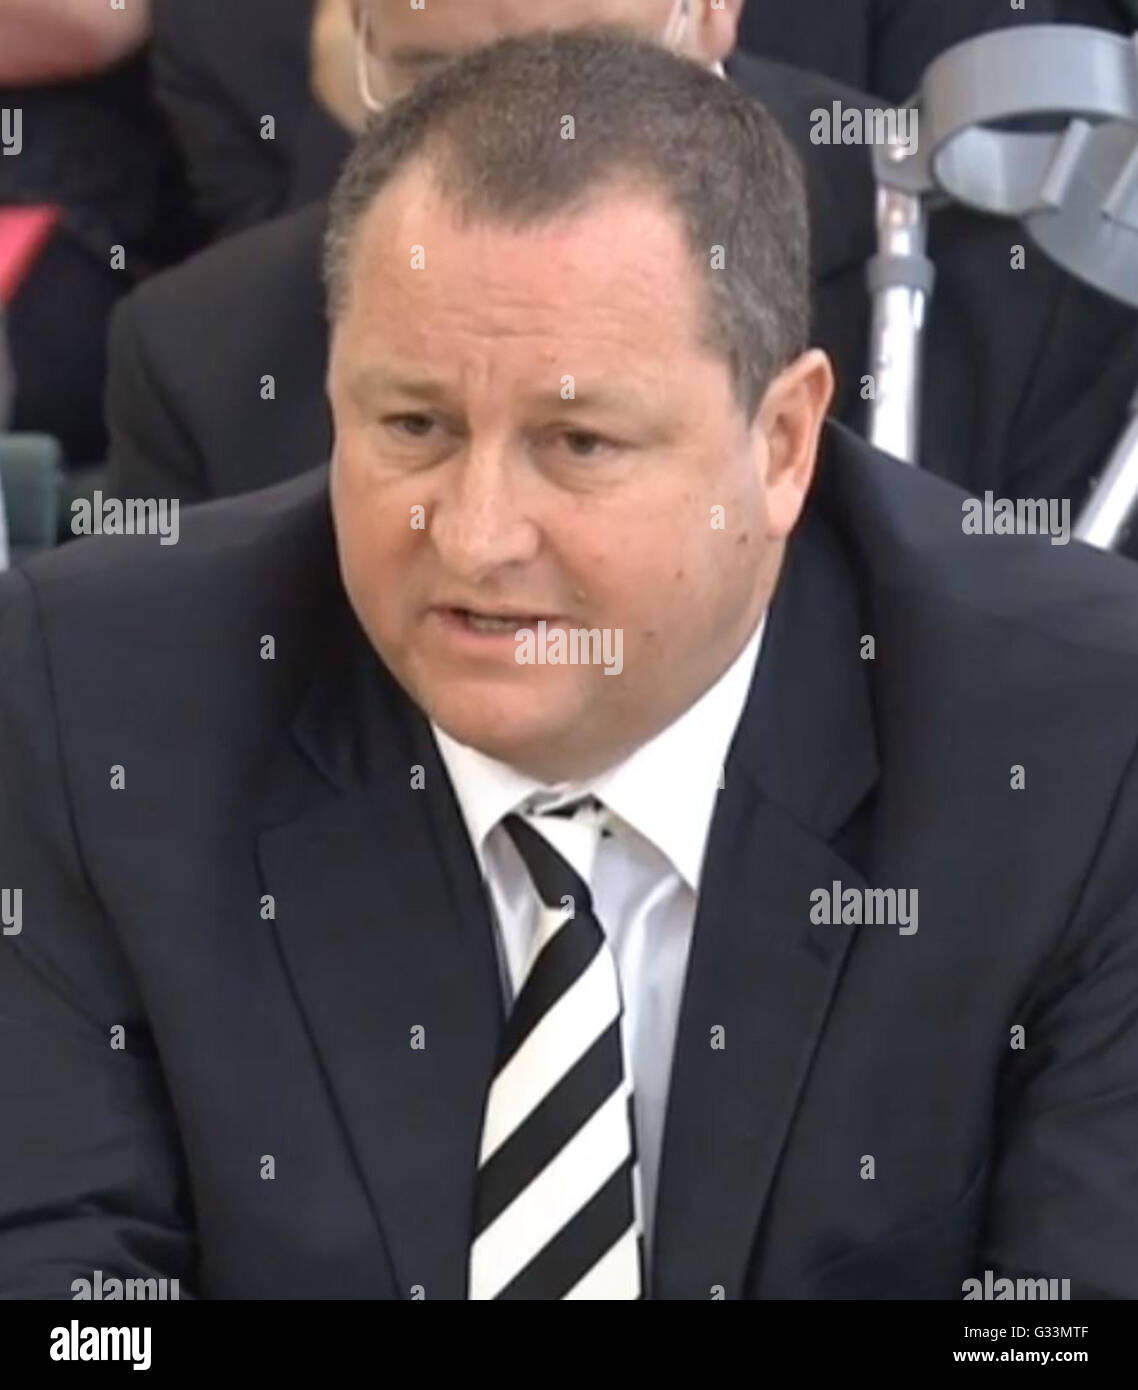 Sports Direct boss Mike Ashley gives evidence to the Business, Innovation and Skills Committee at Portcullis House, London, on working conditions at his company. Stock Photo